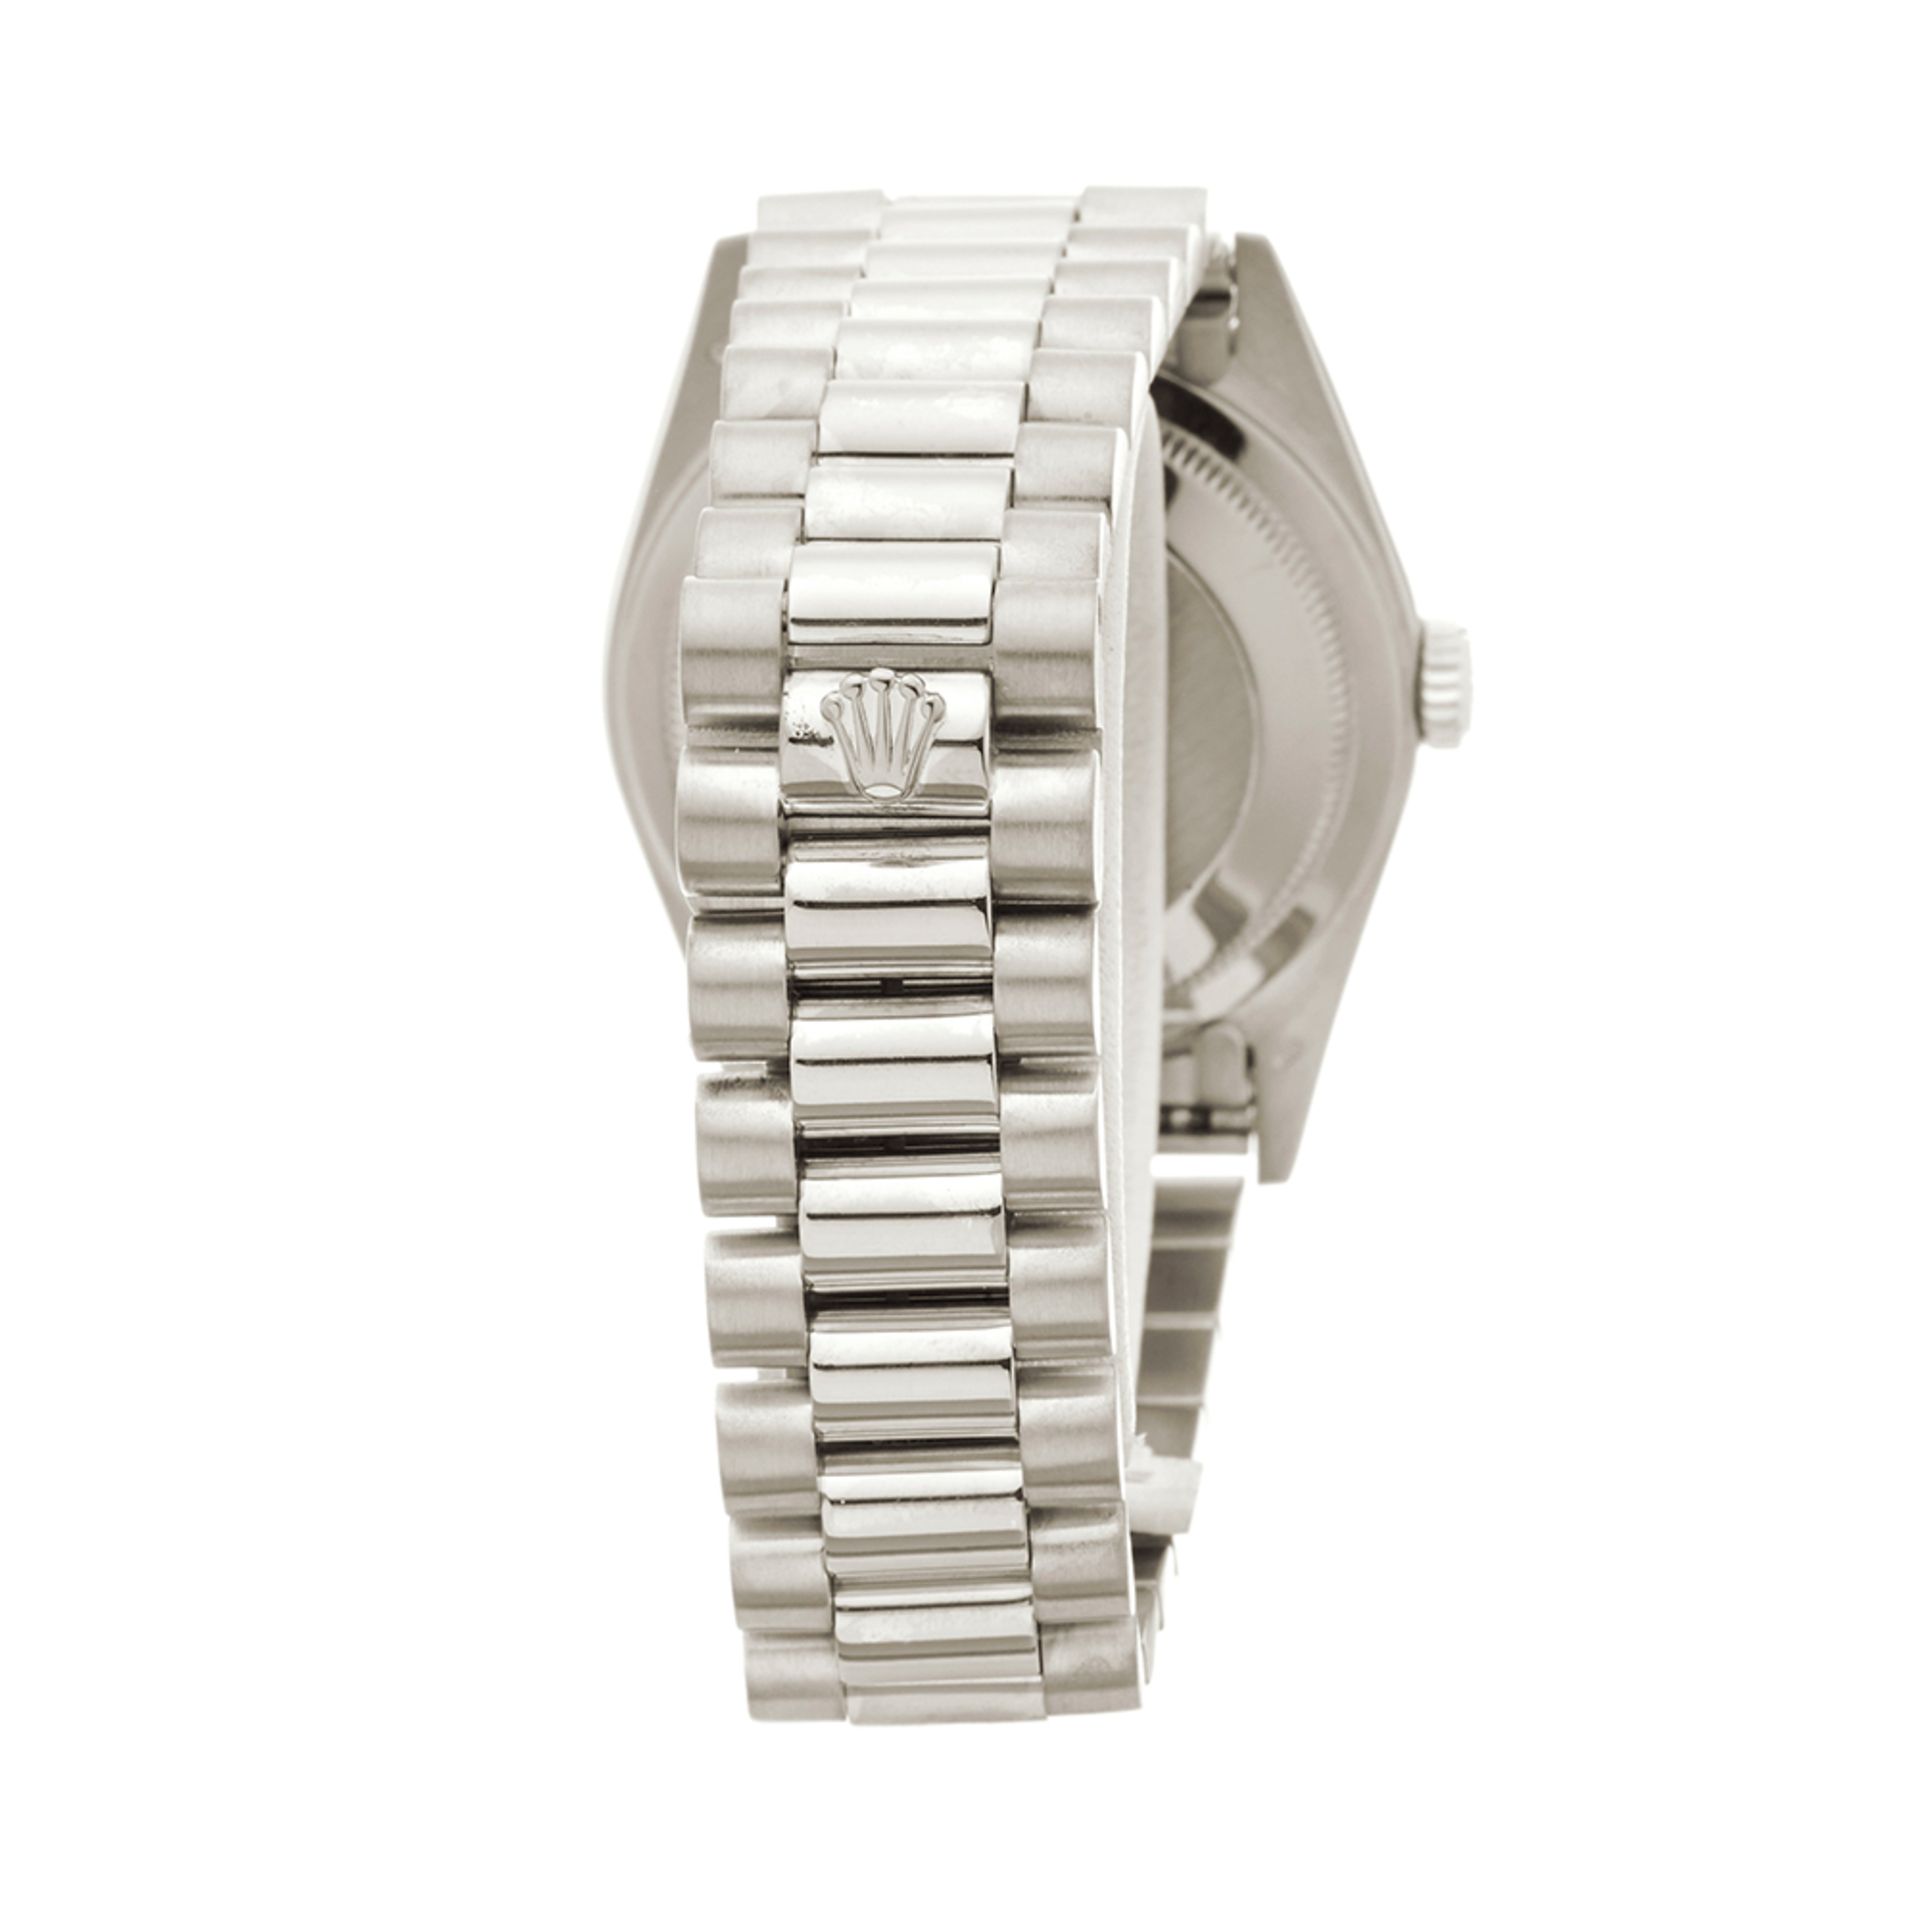 Rolex Day-Date 36mm 18k White Gold - 18239 - Image 6 of 8